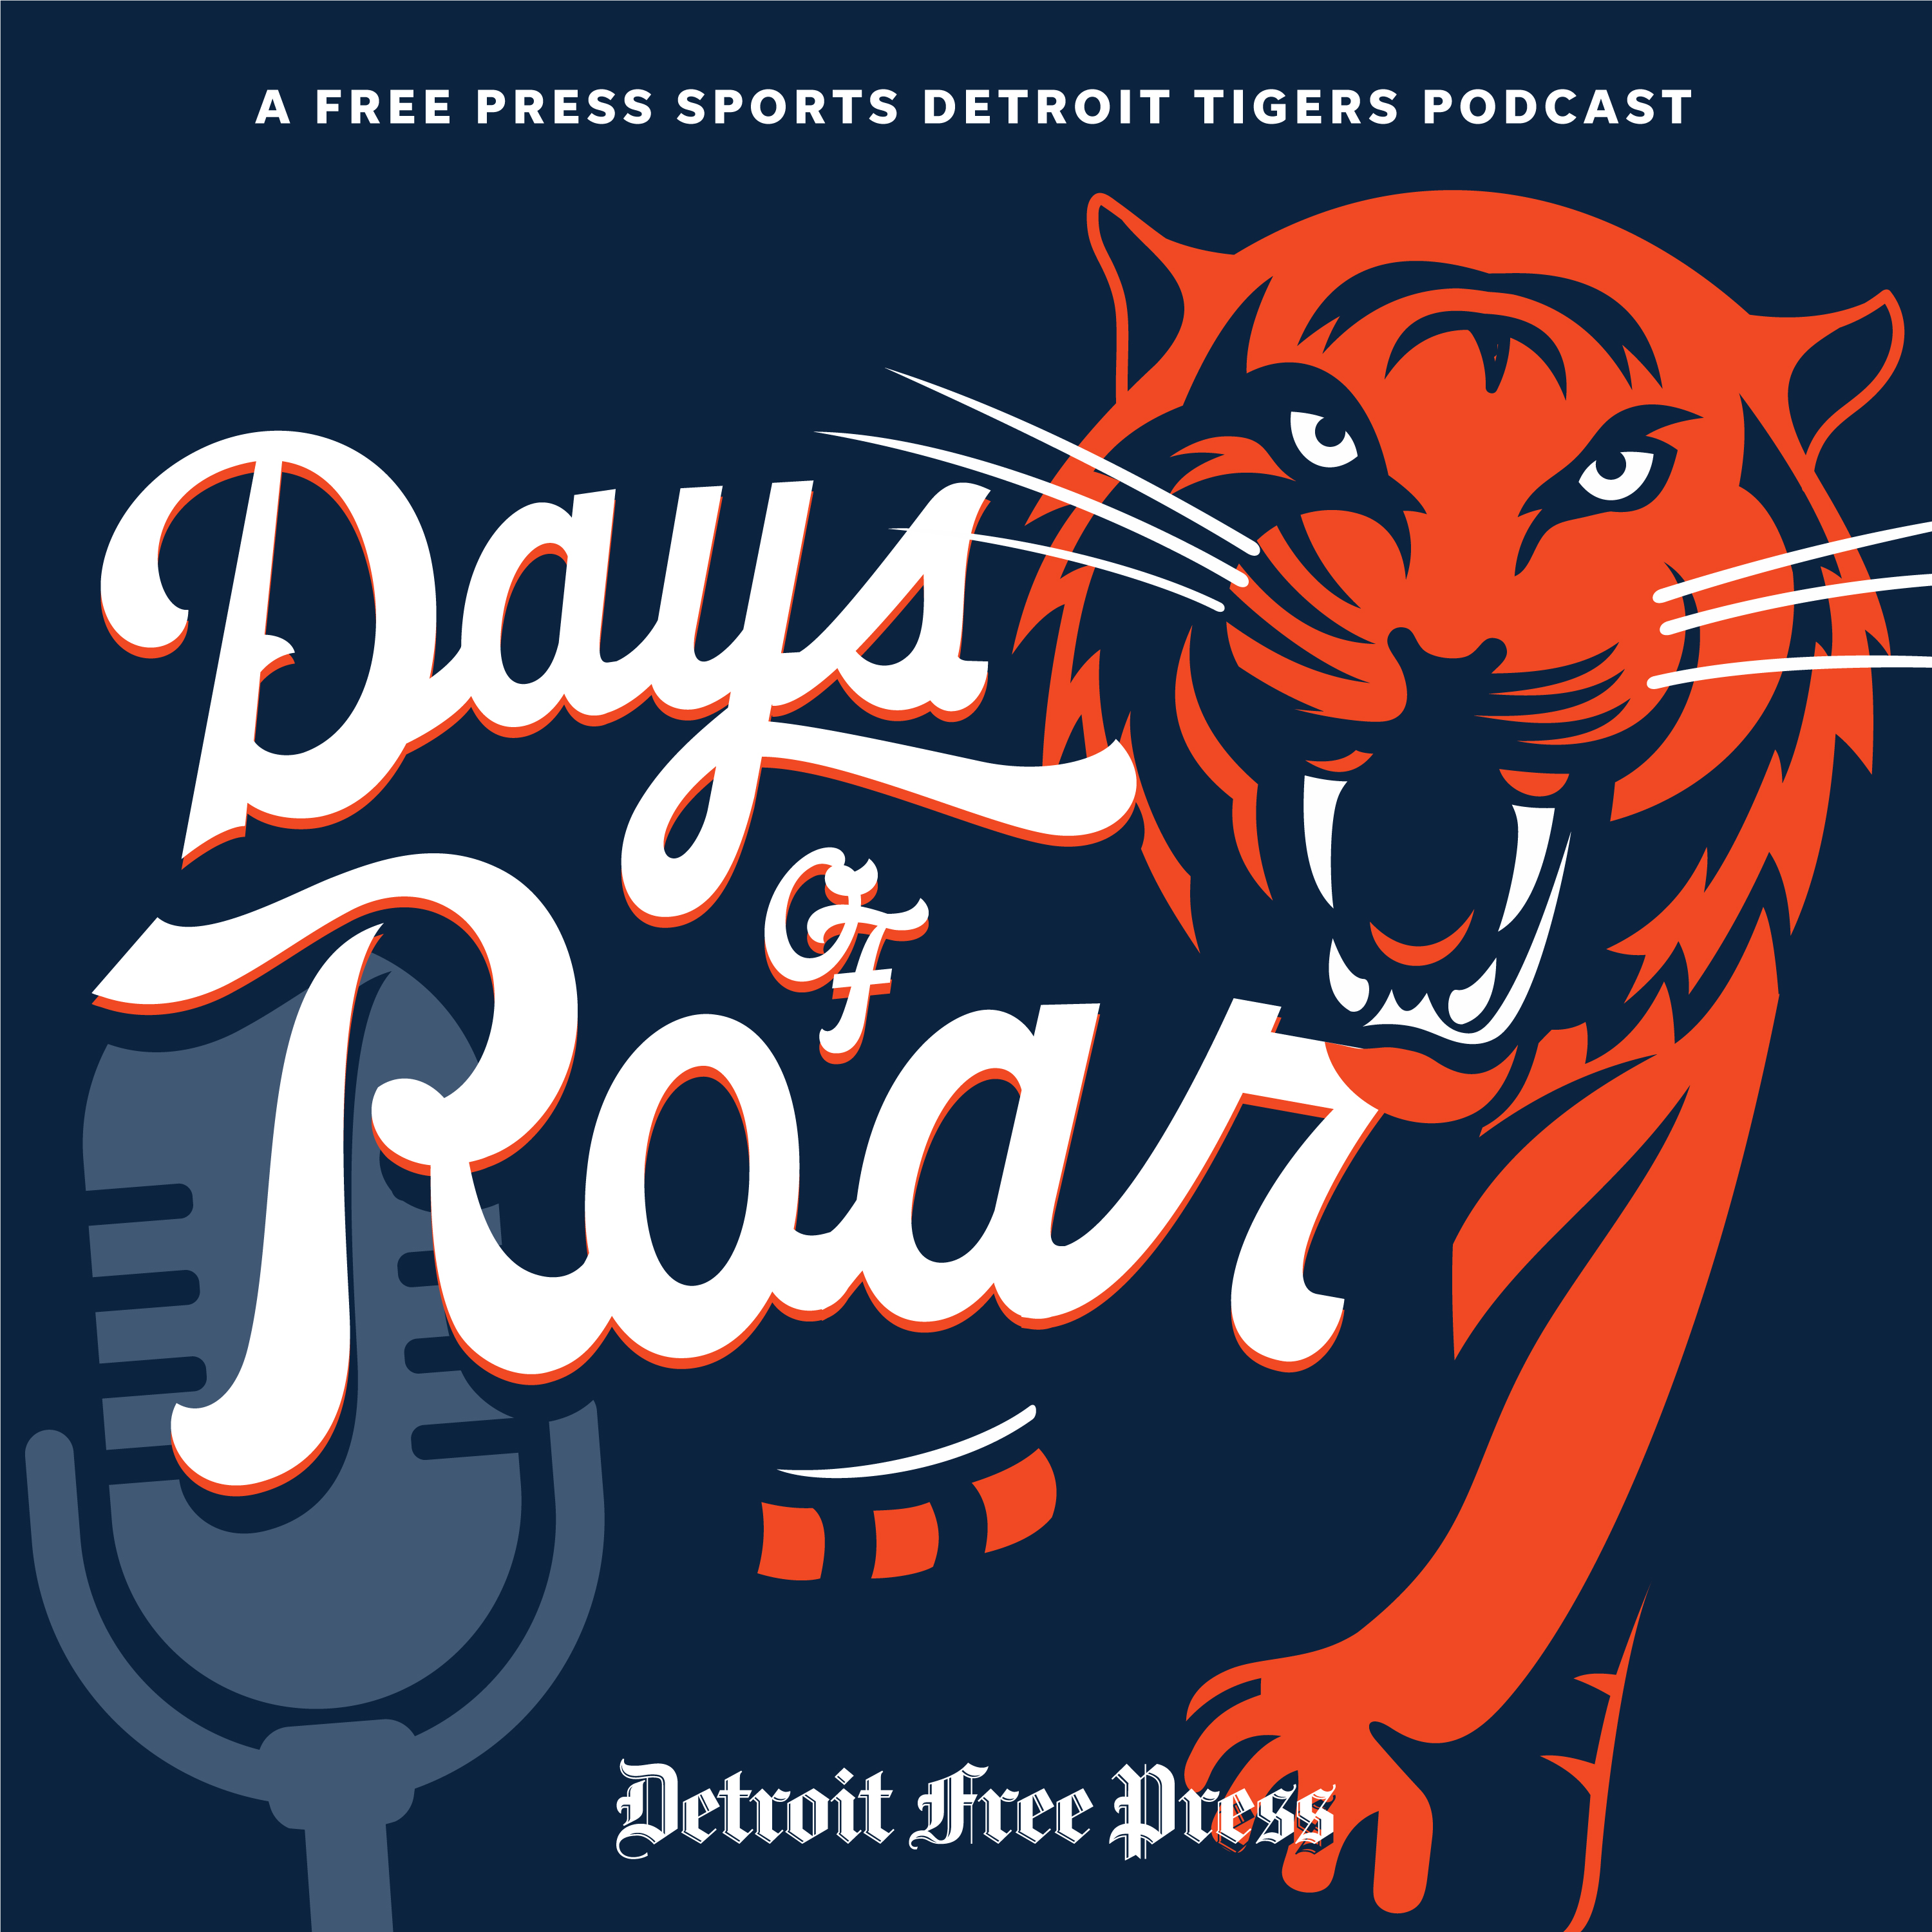 It's still early, but how concerning is Detroit Tigers' offense? Bobby L. Scales II joins to unpack big question